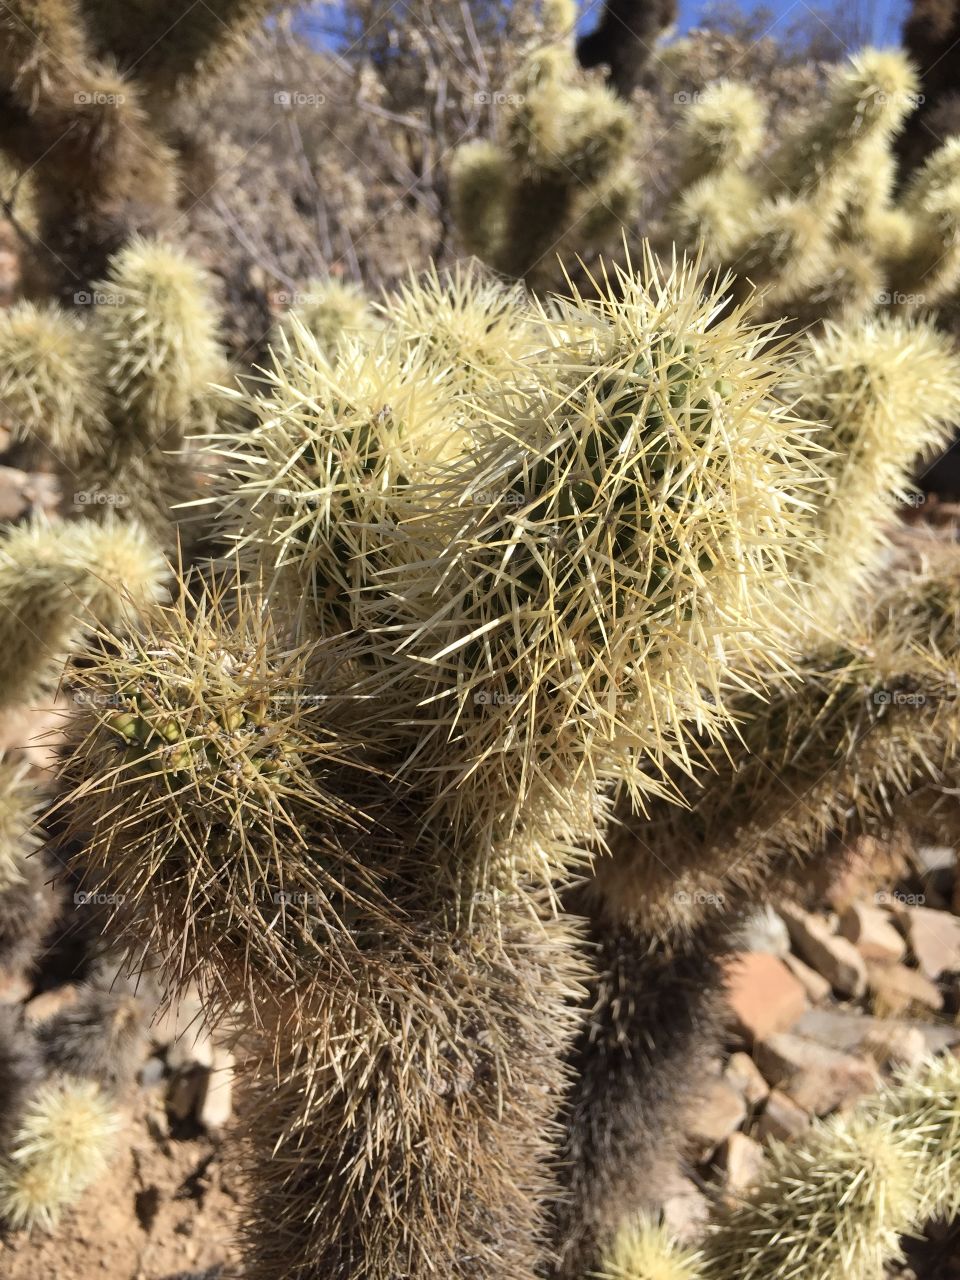 Desert Museum in Tucson, Arizona. “Teddy bear” cactus. You can look but don’t touch!